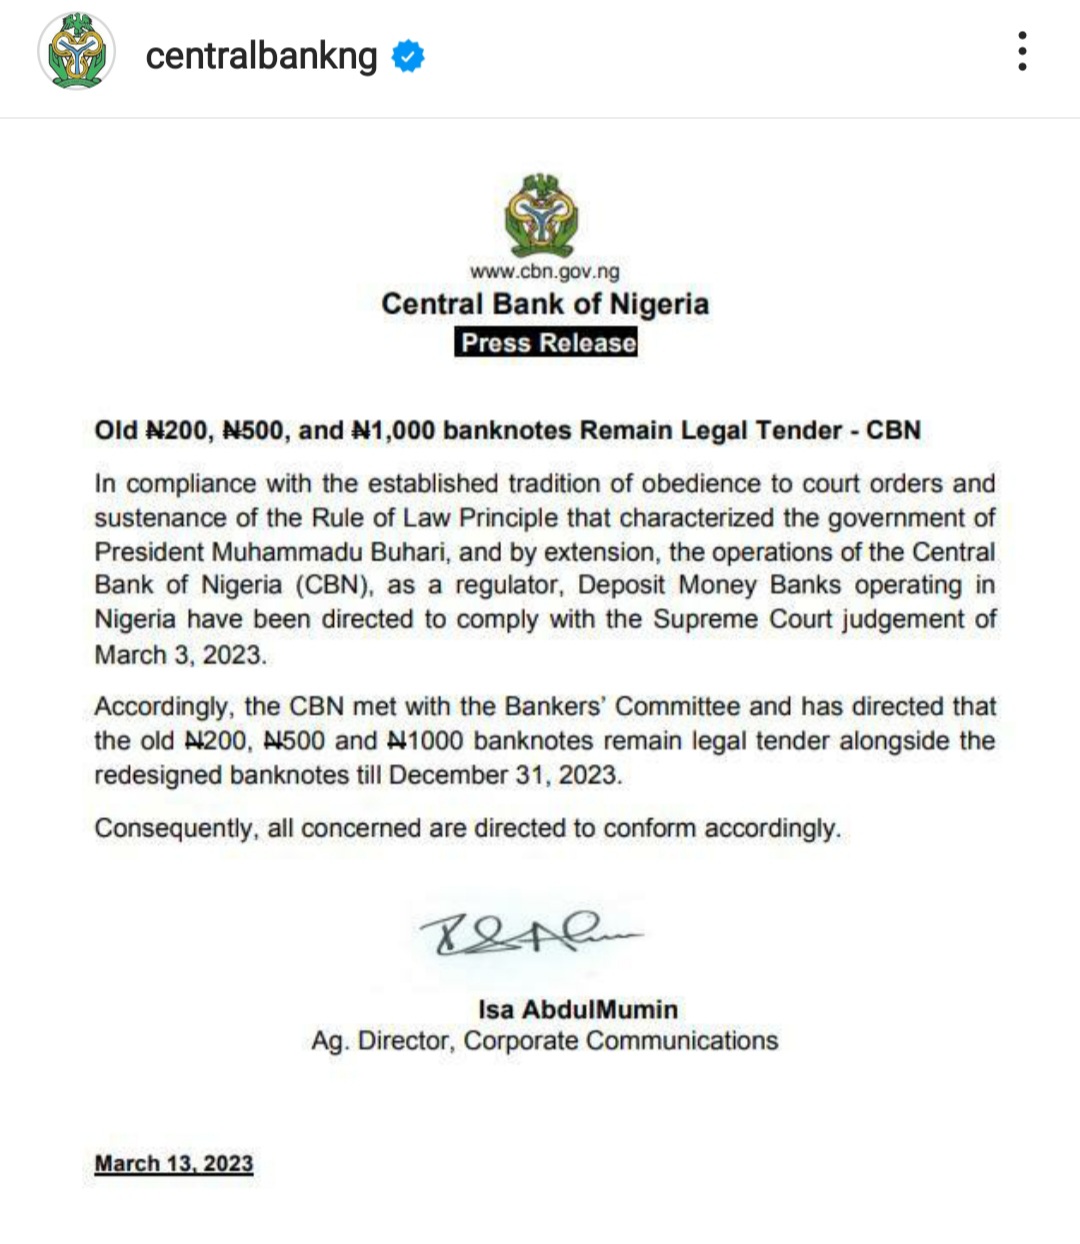 CBN directs banks to dispense and receive old N200, N500 and N1000 notes